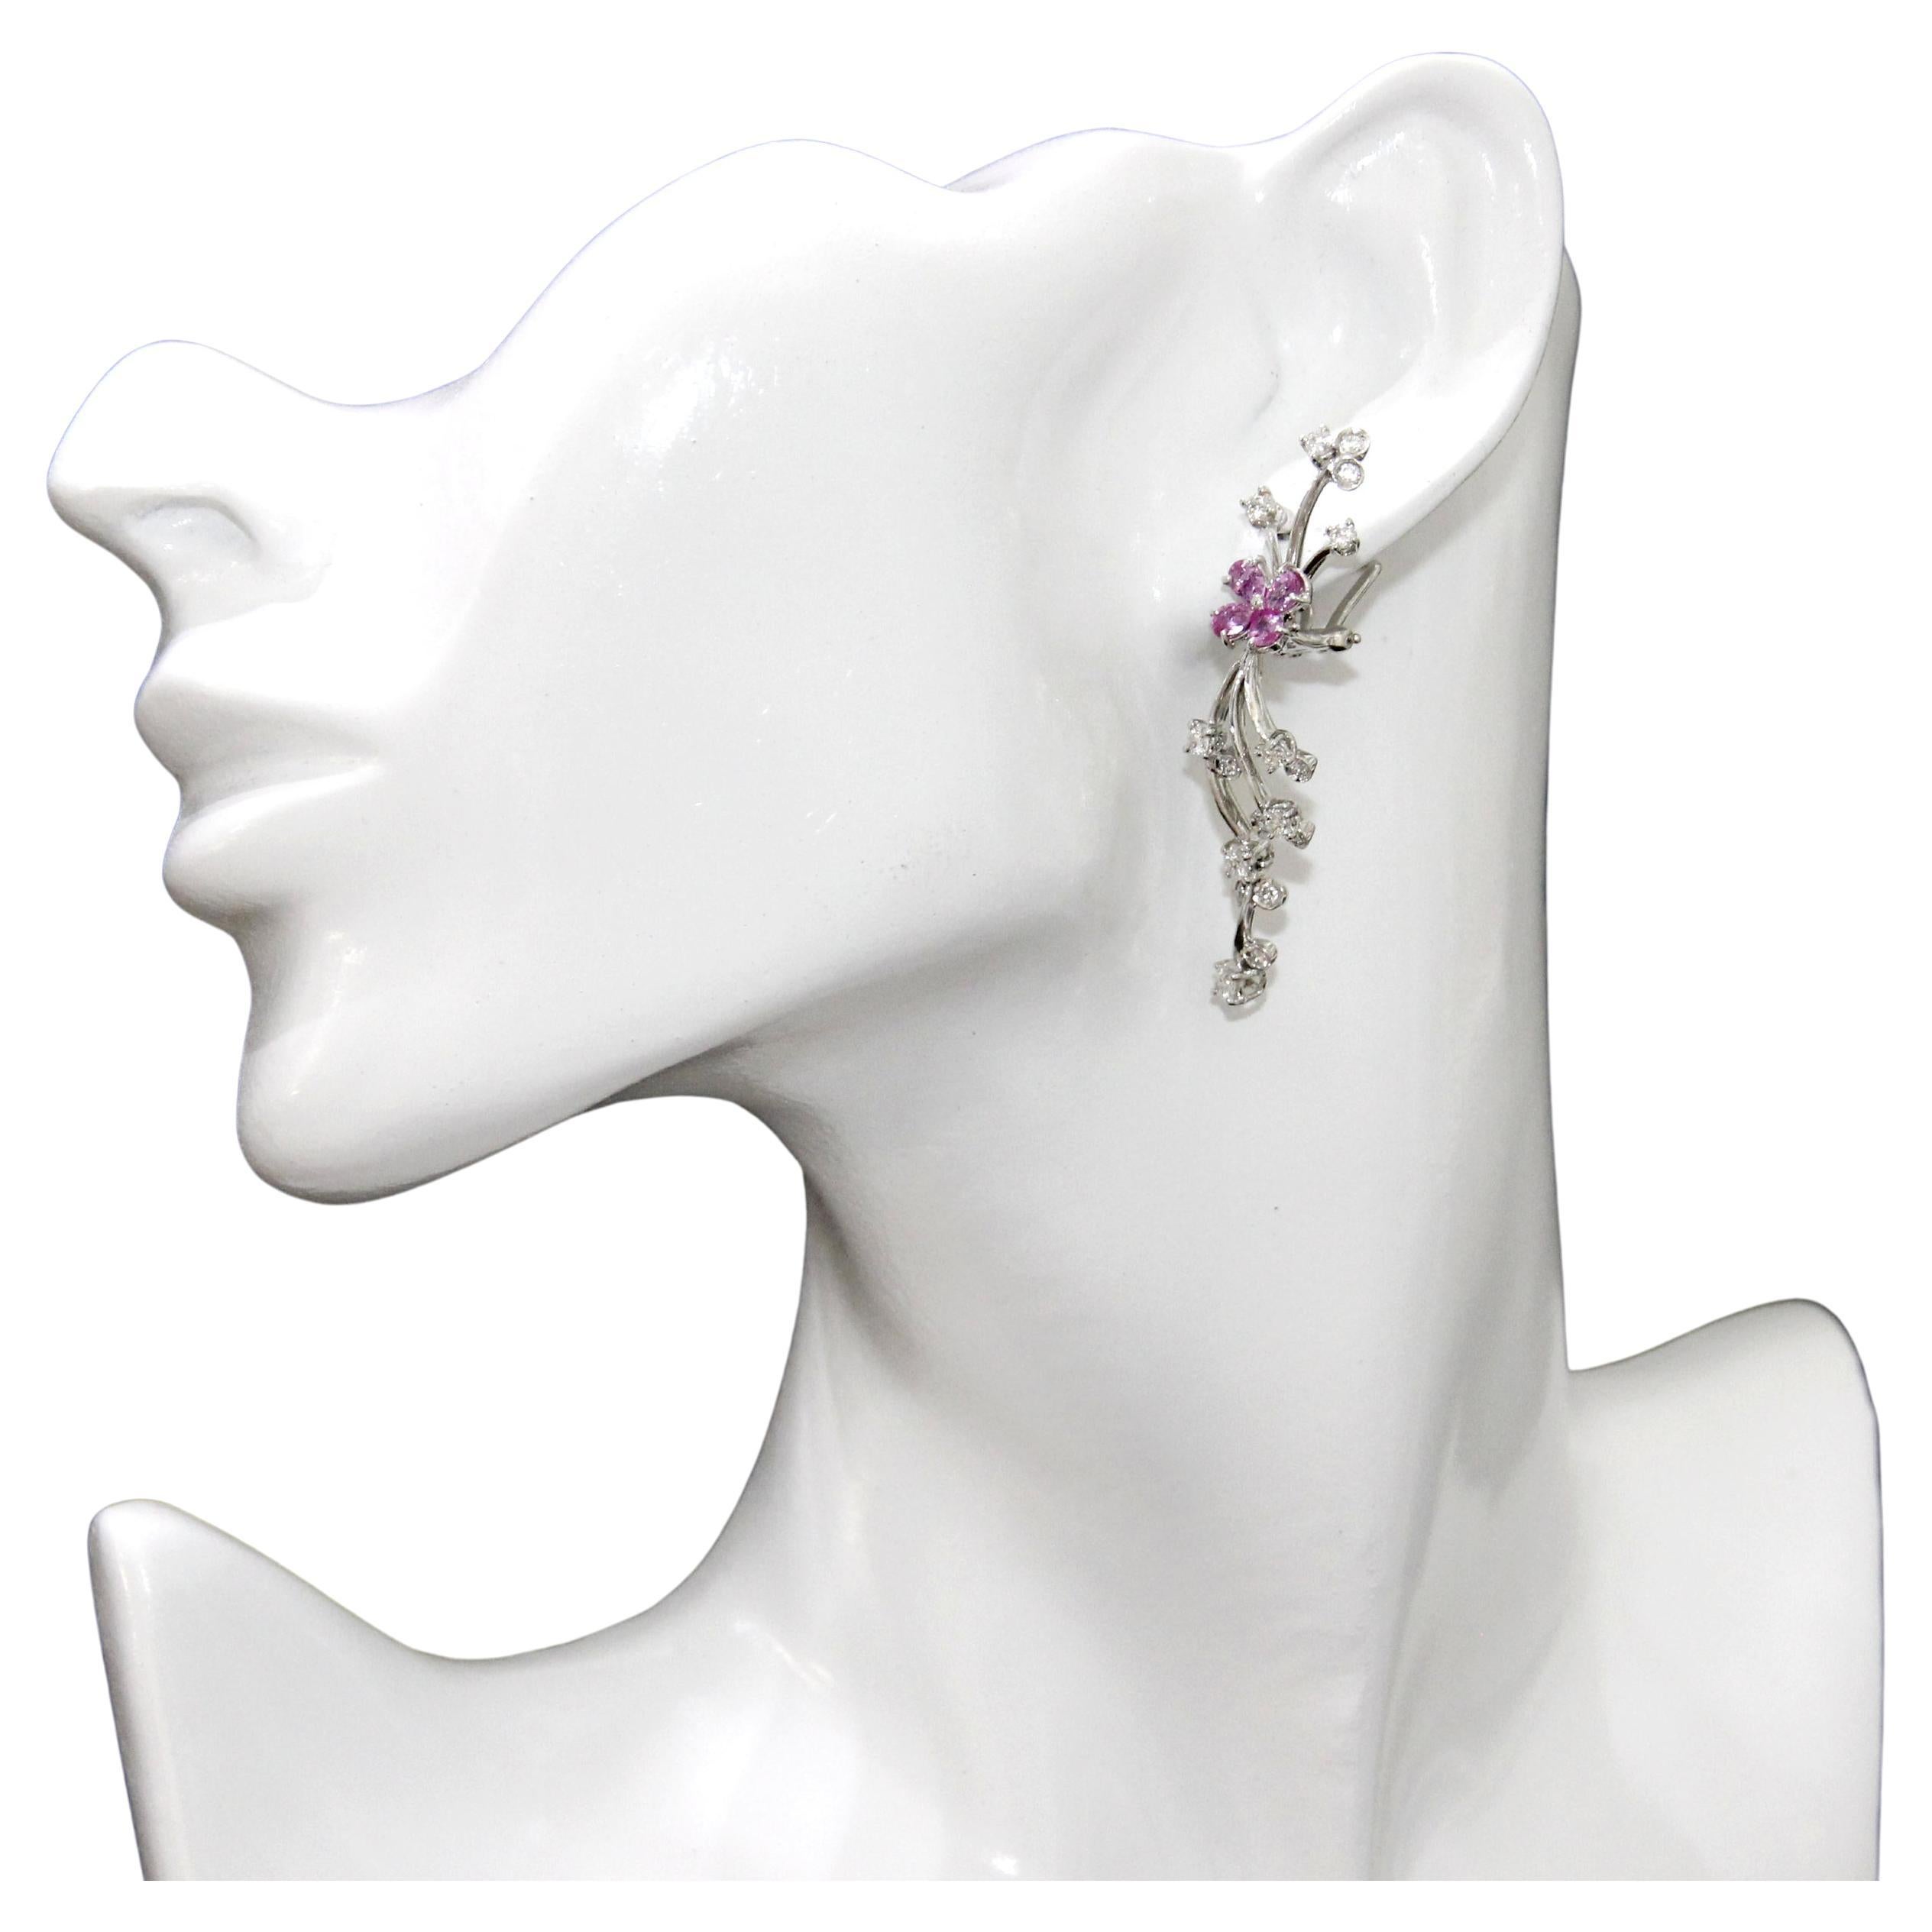 18K White Gold, Diamonds and Pink Sapphire Flower  Earrings
Diamonds .47ctw
Pink Sapphires 1.77ctw
Omega Backs 
Retail $14,800.00